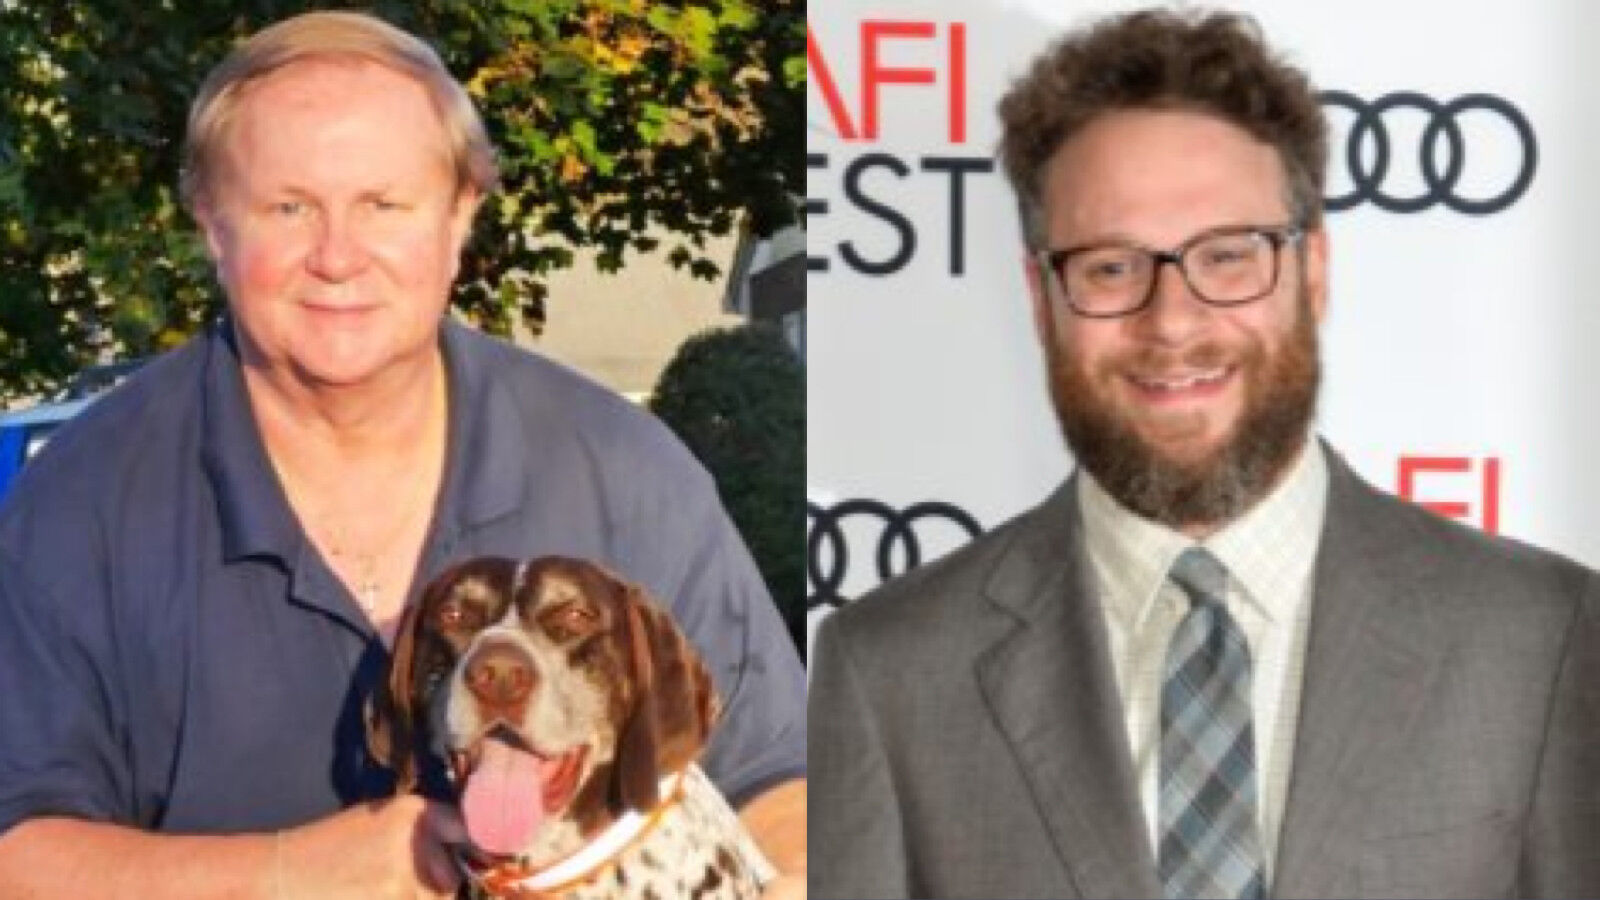 Dean Browning (left) and Seth Rogen (right)